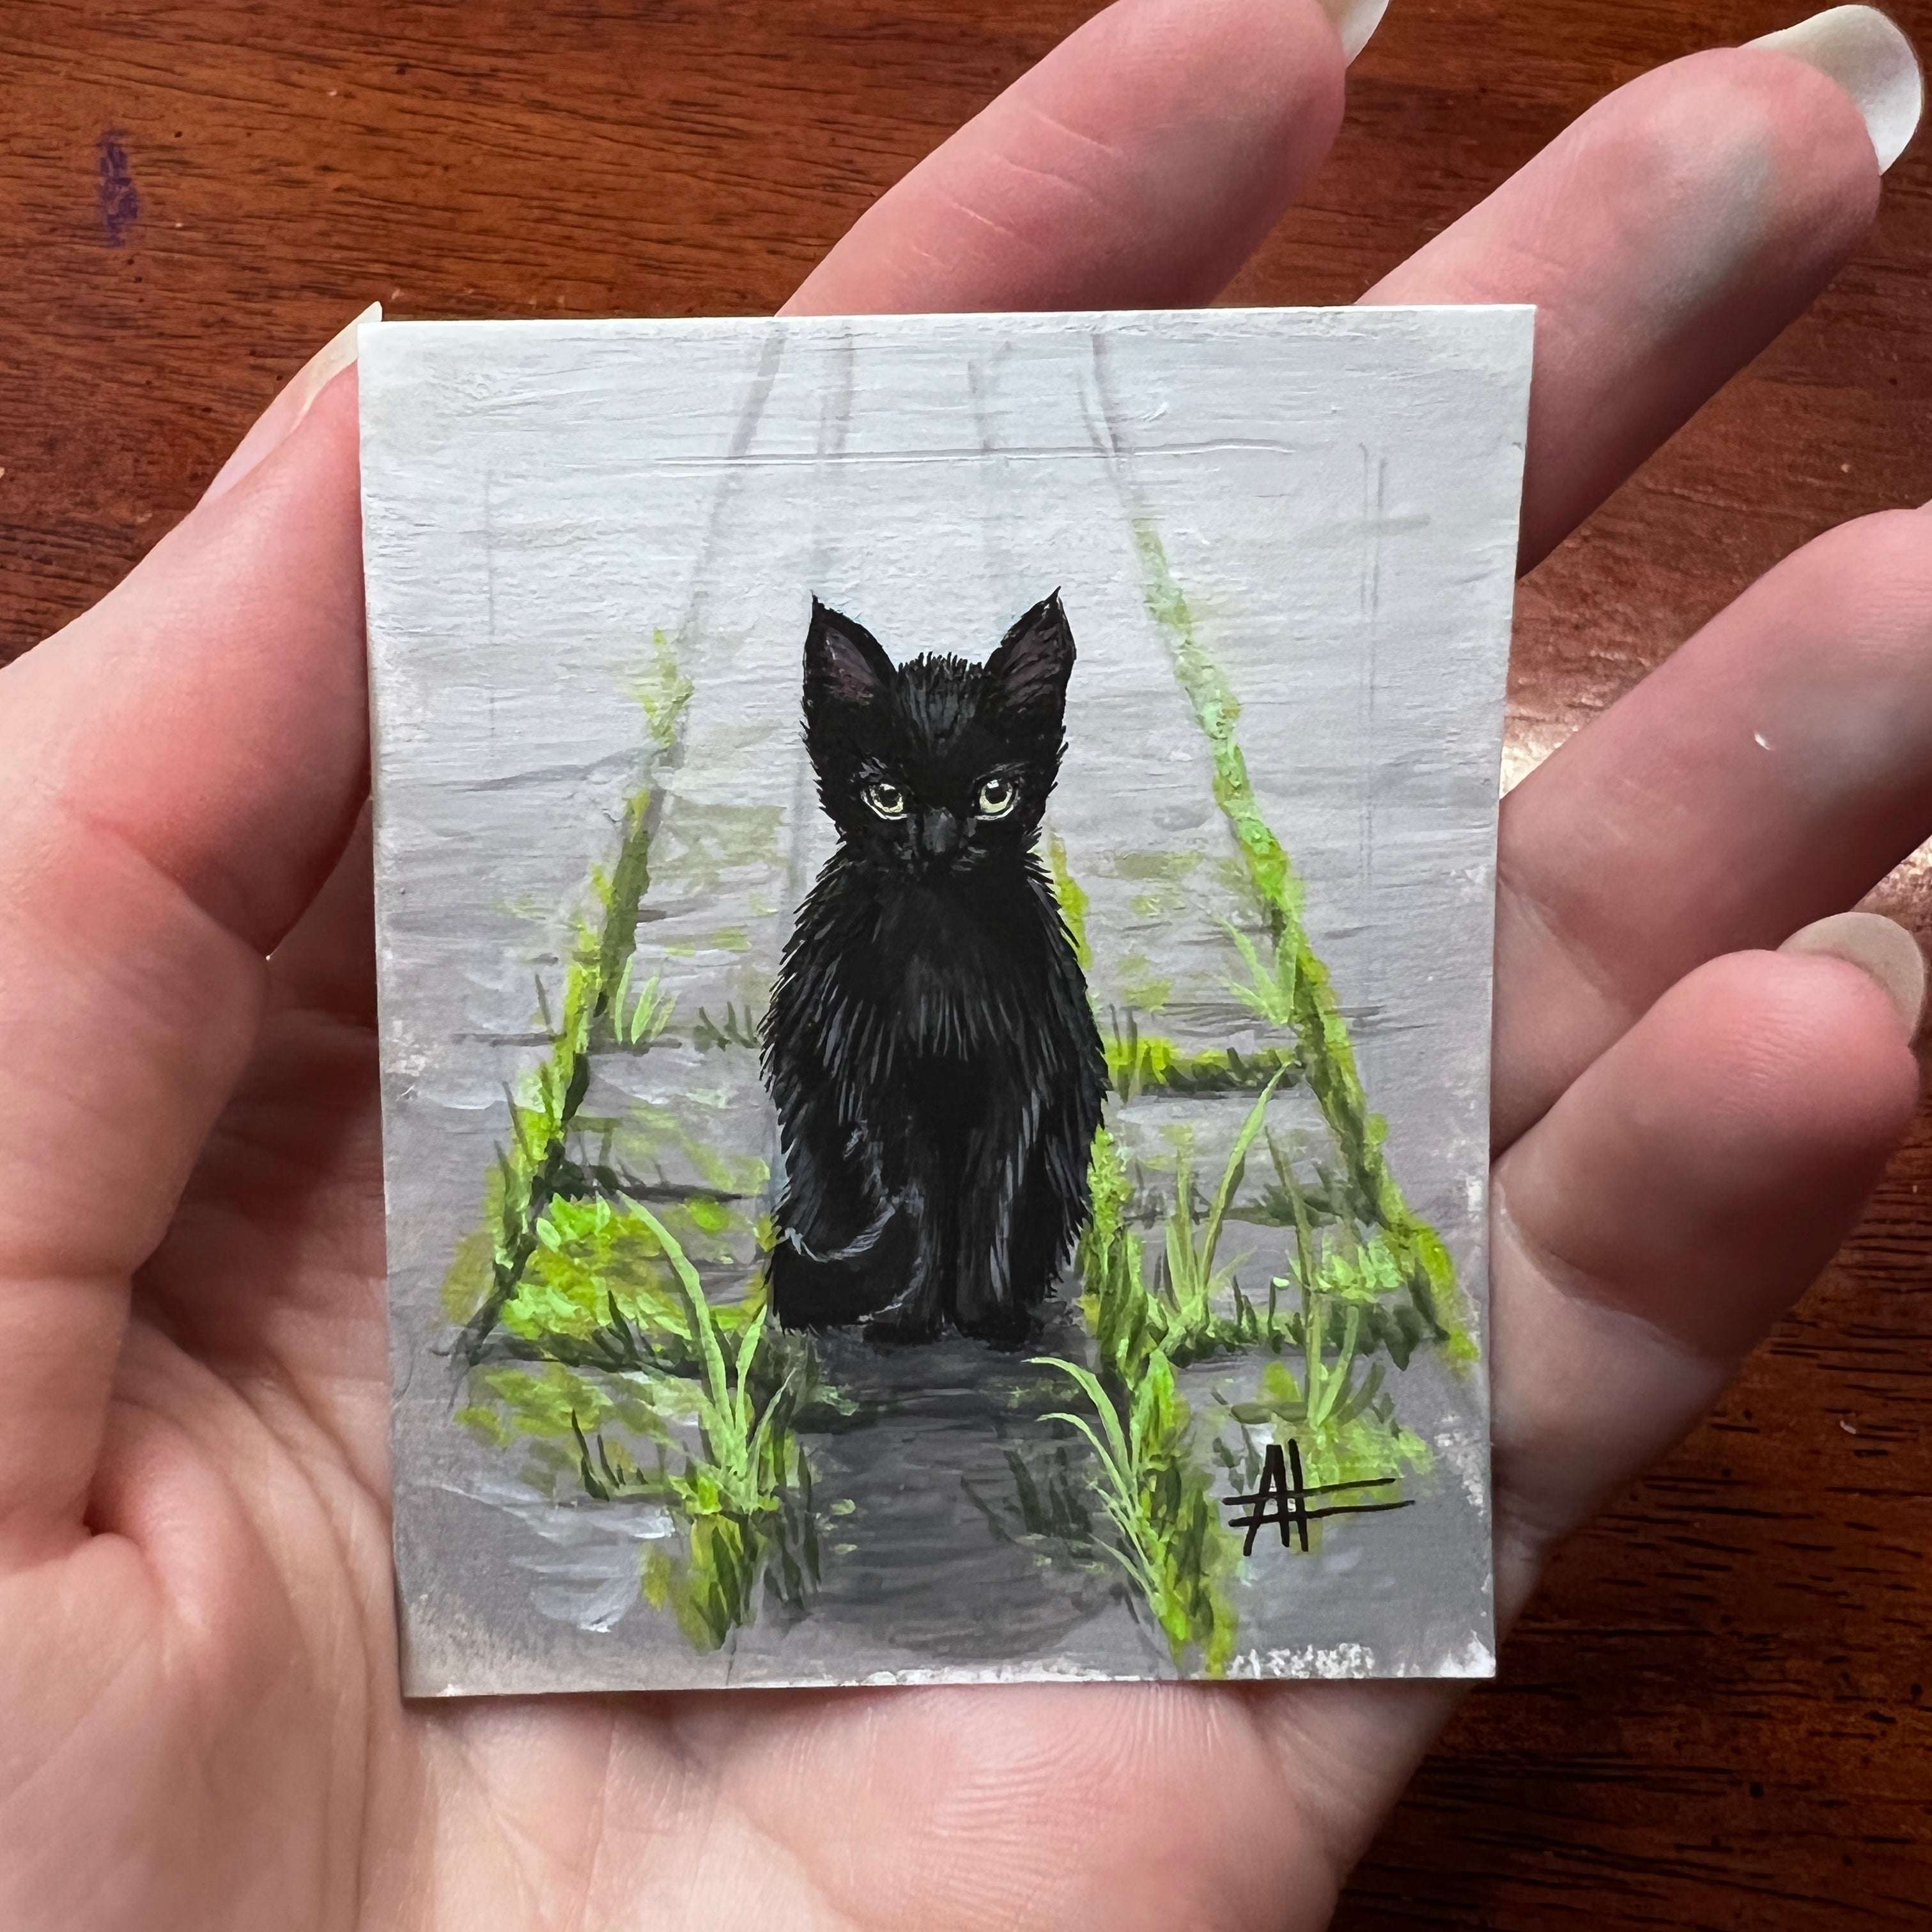 Hand-held painting of a black cat sitting on stone steps among greenery.